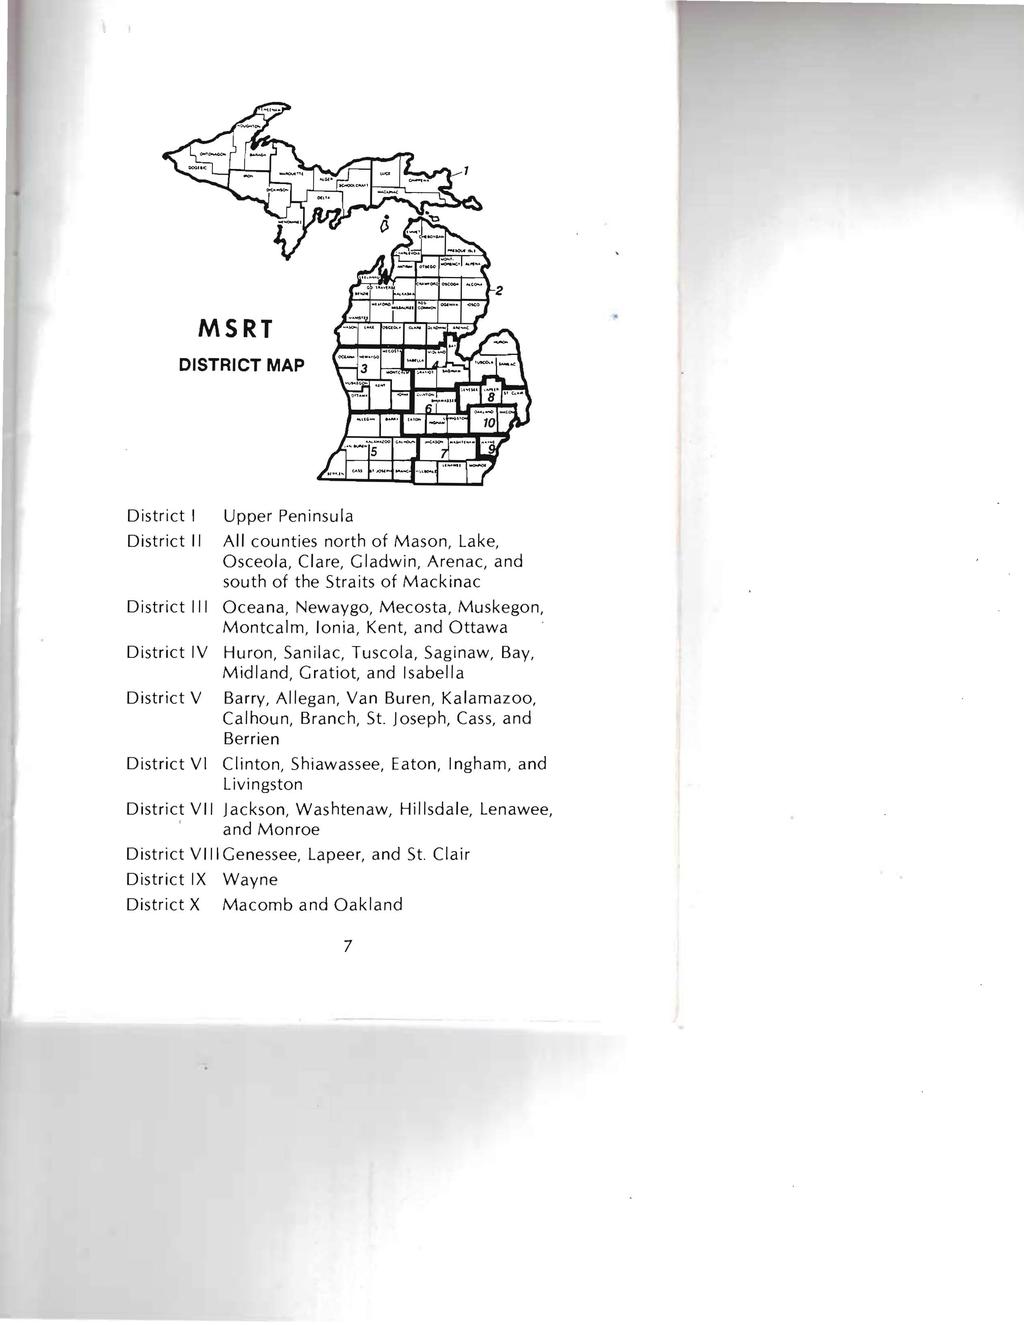 MSRT DISTRICT MAP District I District II Upper Peninsula All counties north of Mason, Lake, Osceola, Clare, Gladwin, Arenac, and south of the Straits of Mackinac District III Oceana, Newaygo,